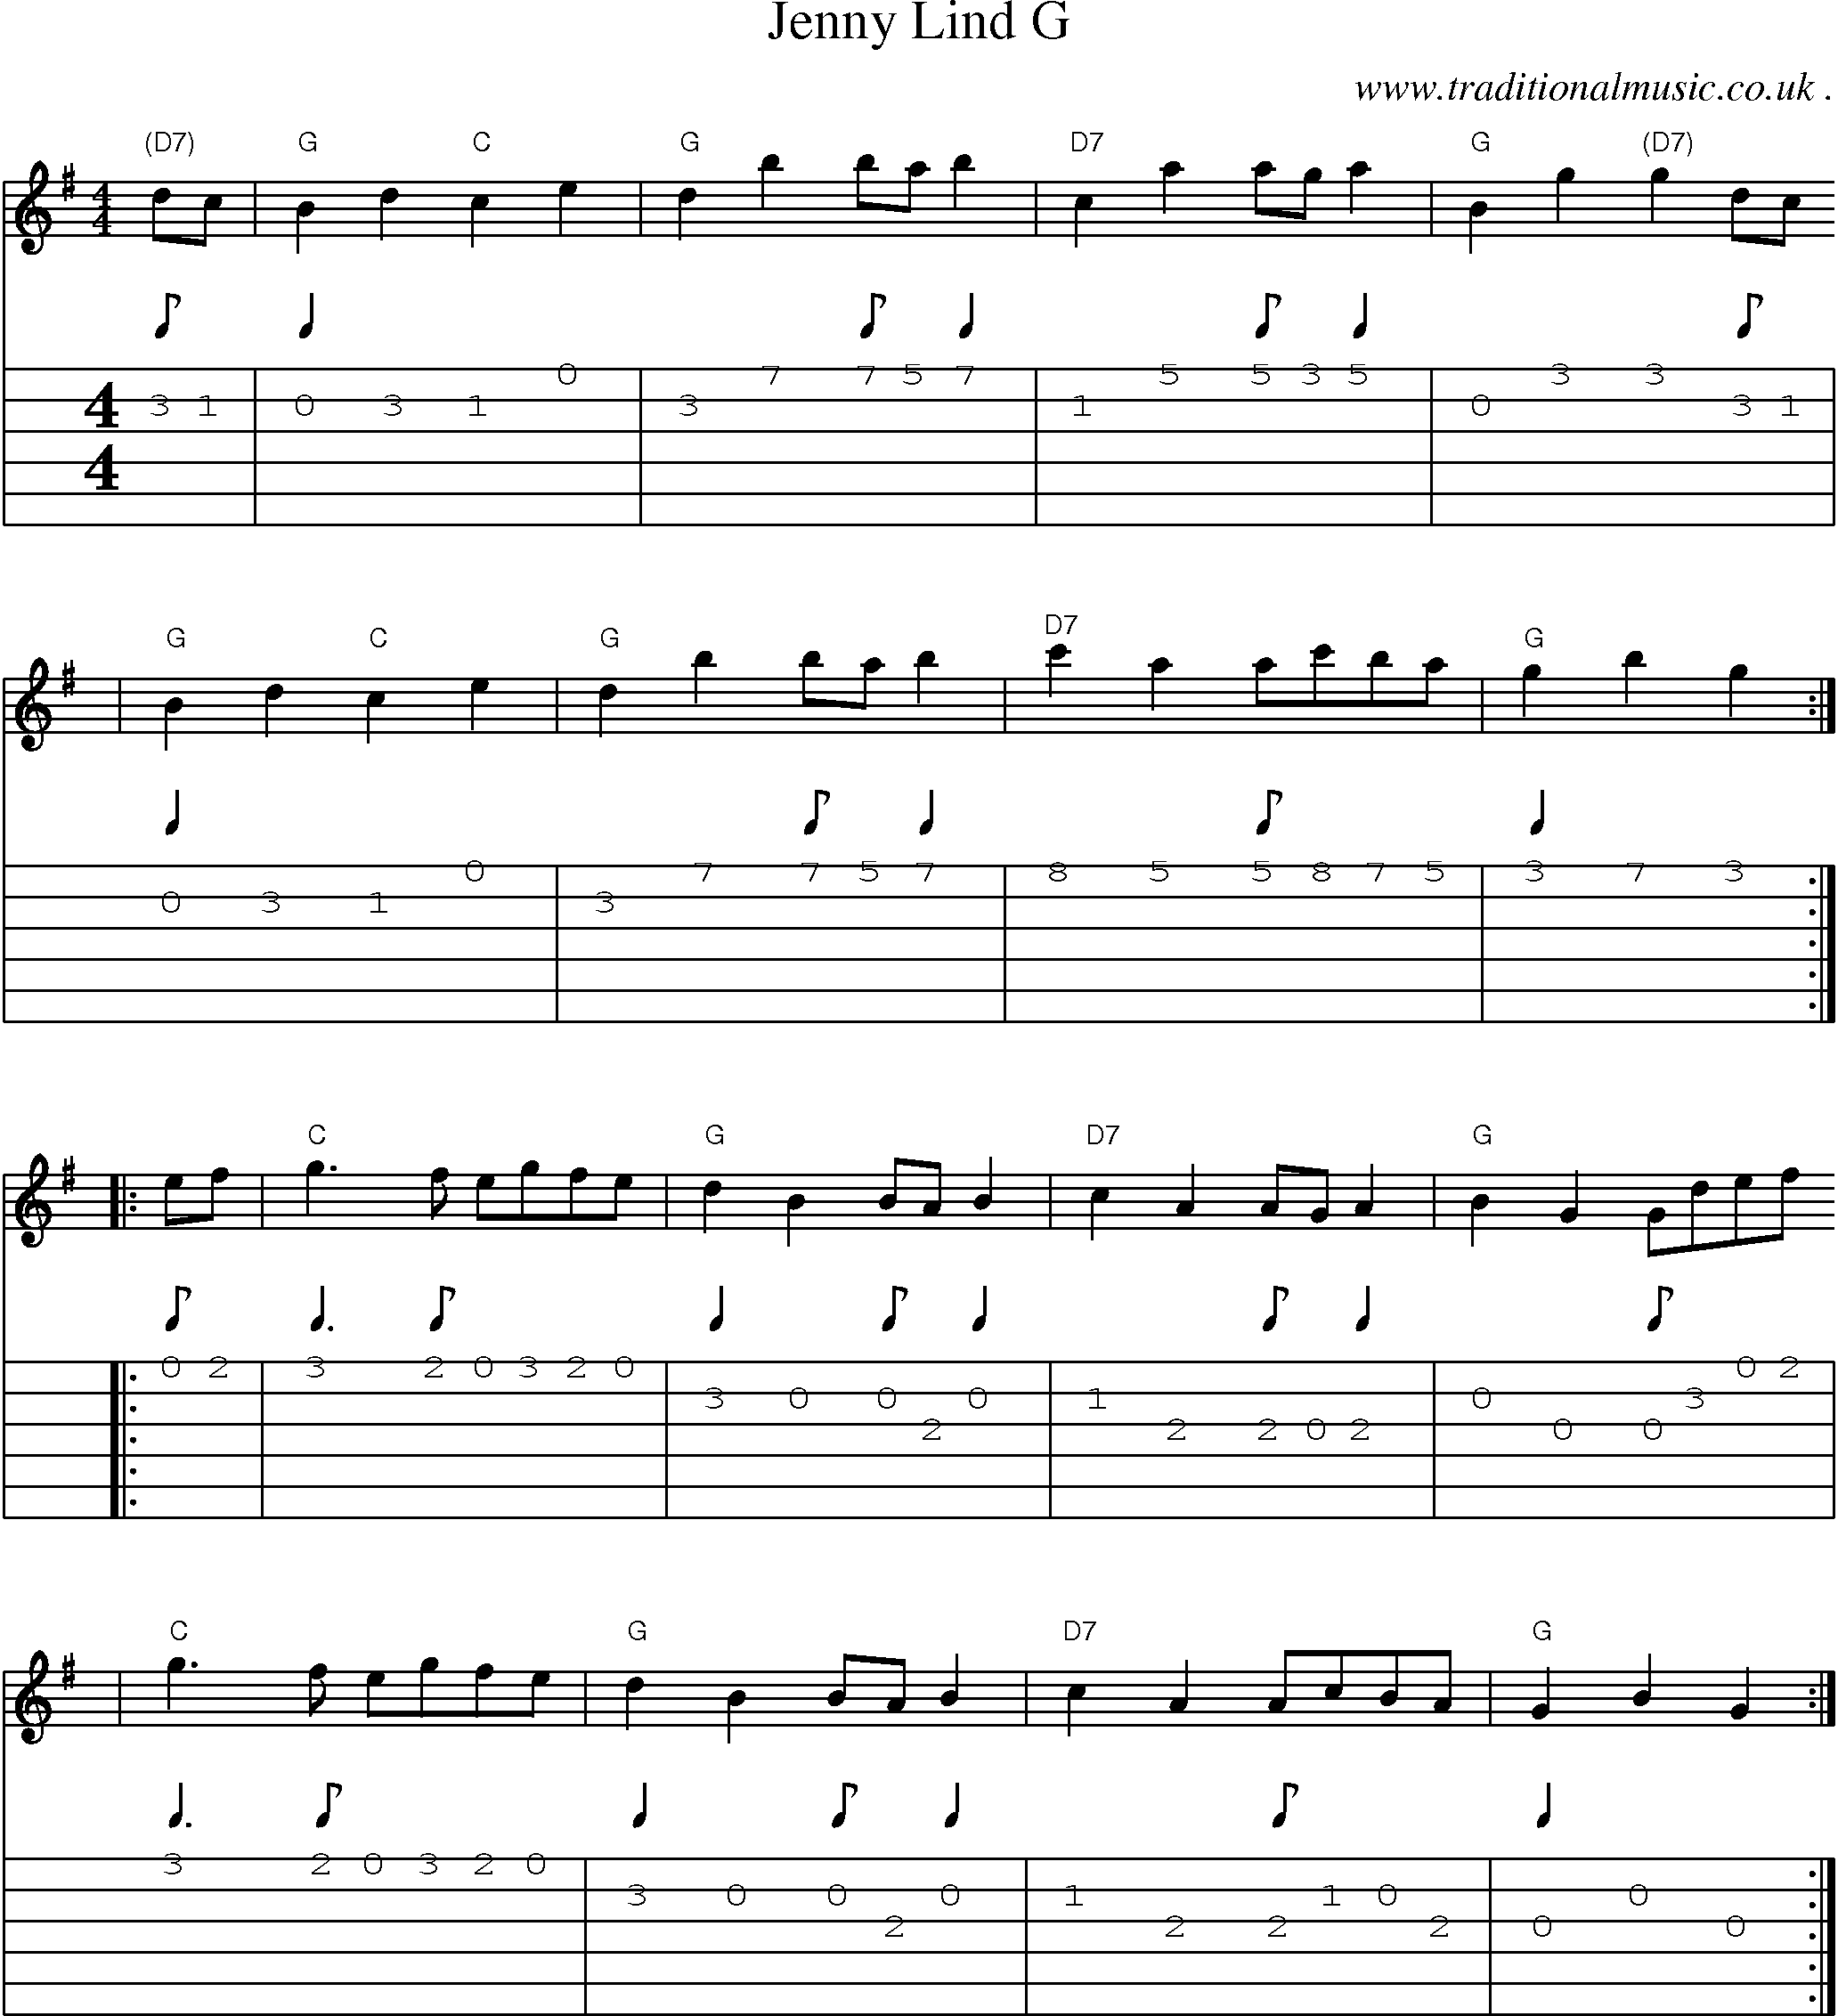 Music Score and Guitar Tabs for Jenny Lind G